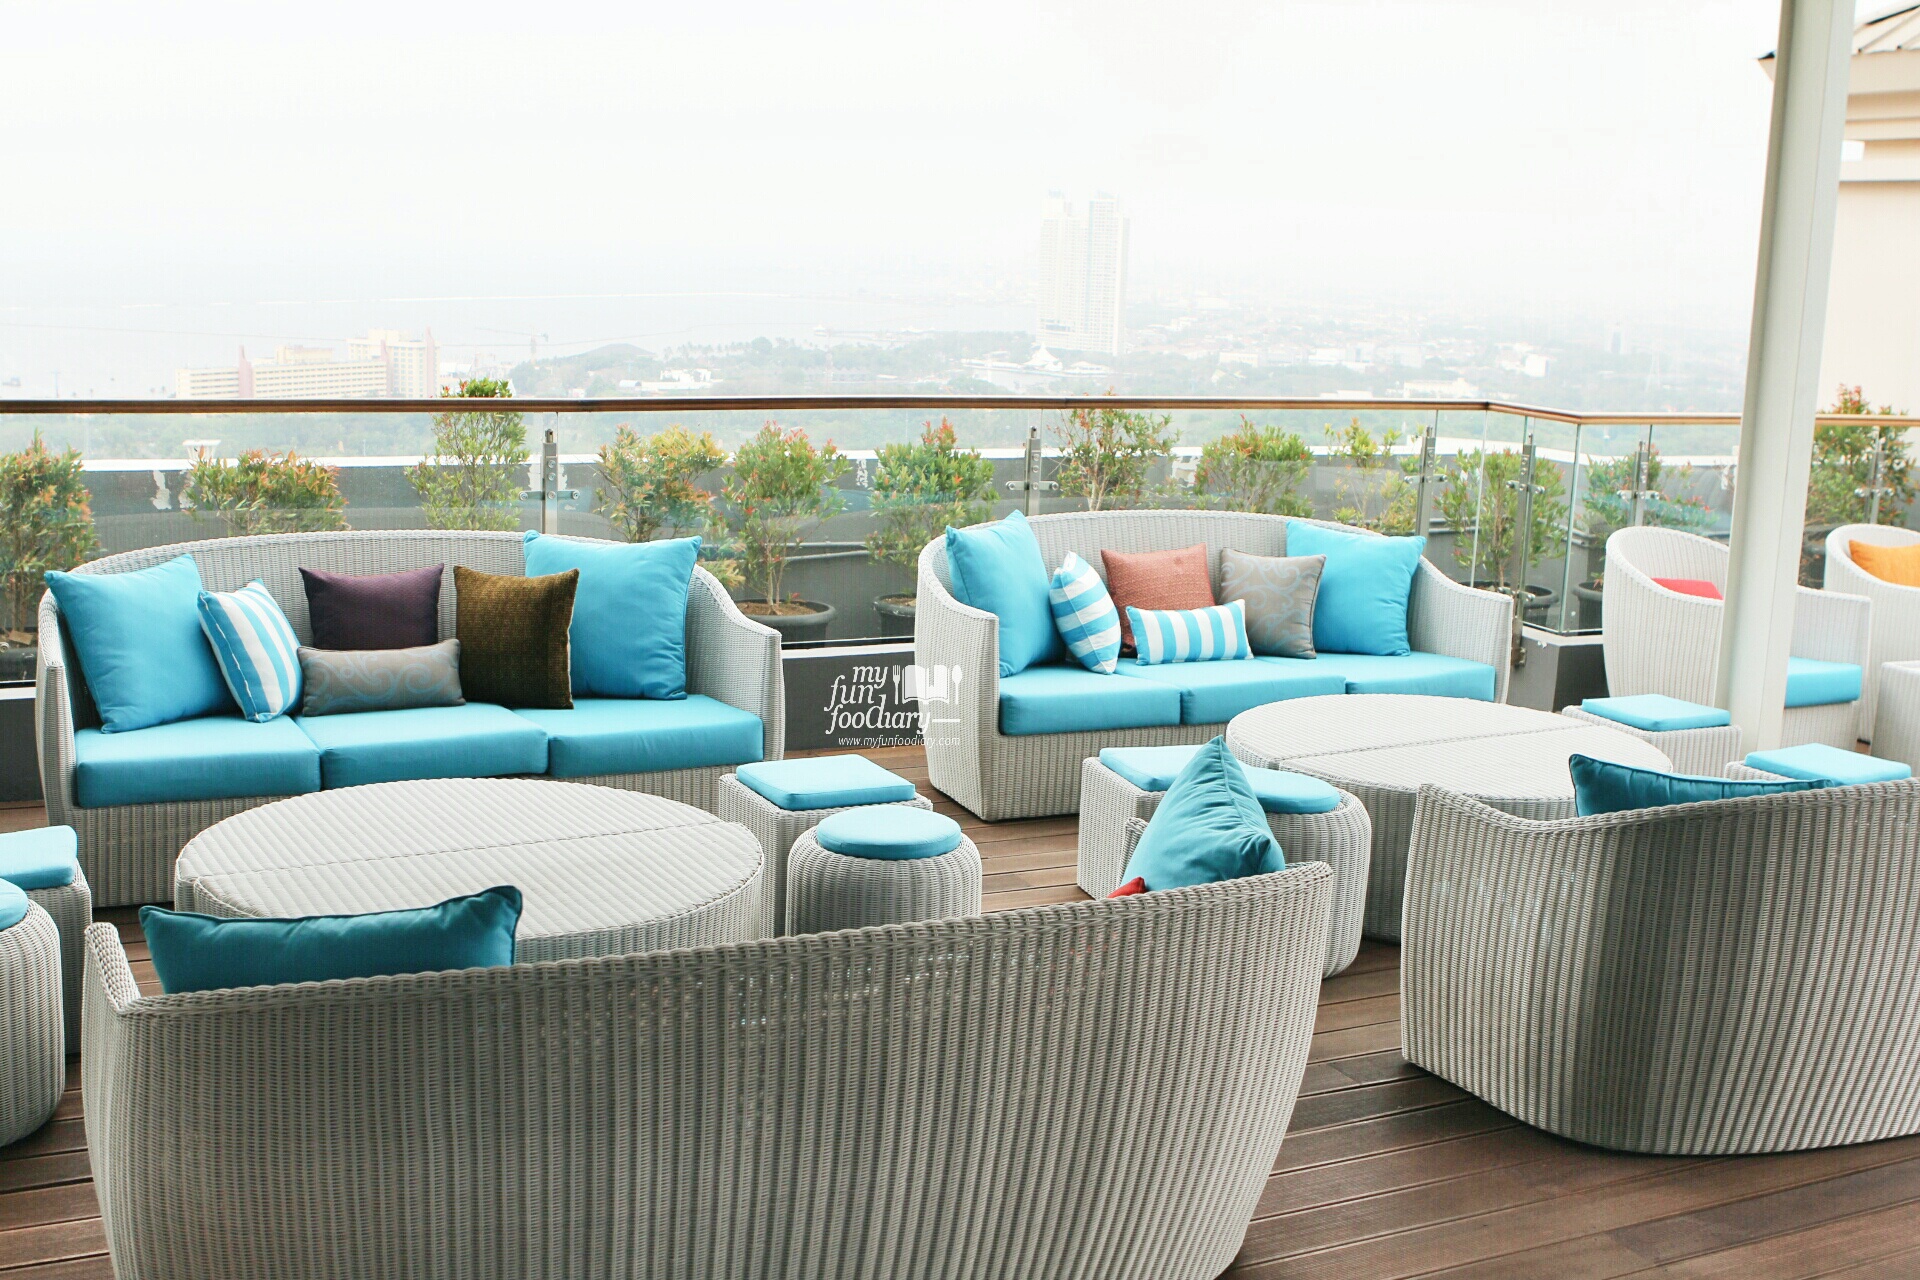 Day Ambience at 33 Degree Skybridge Lounge by Myfunfoodiary